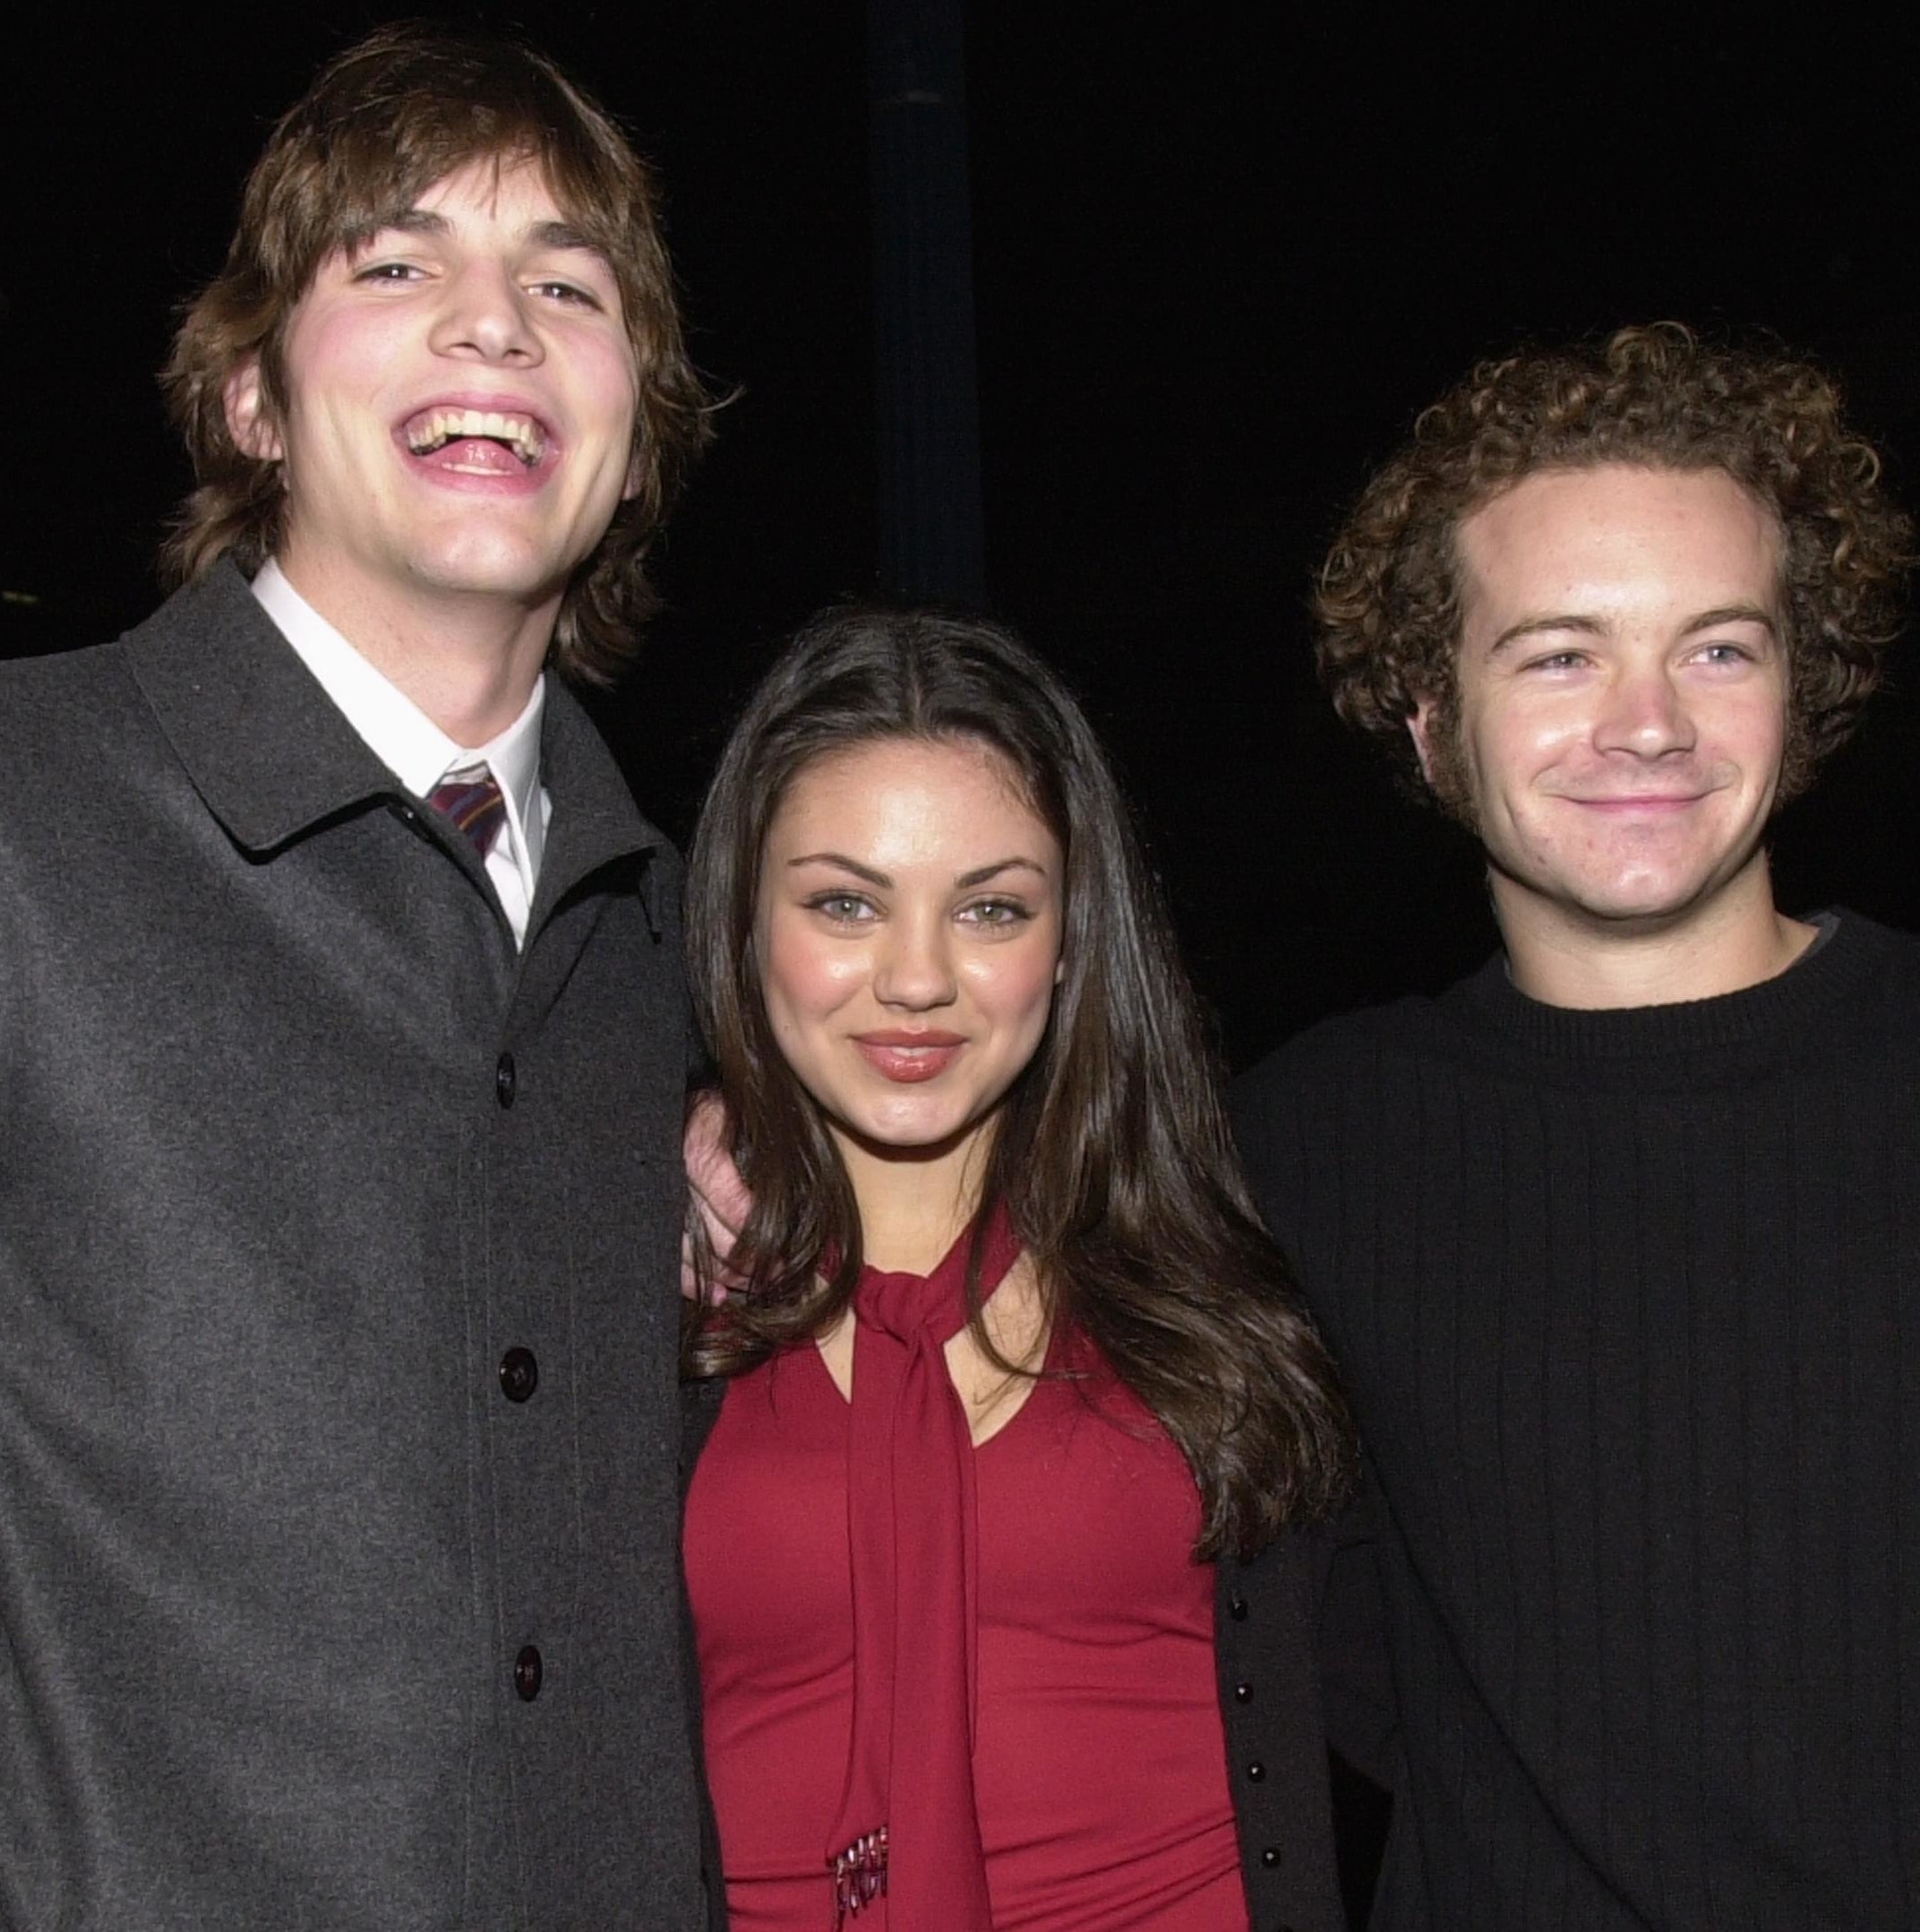 Close-up of Ashton, Mila, and Danny smiling together